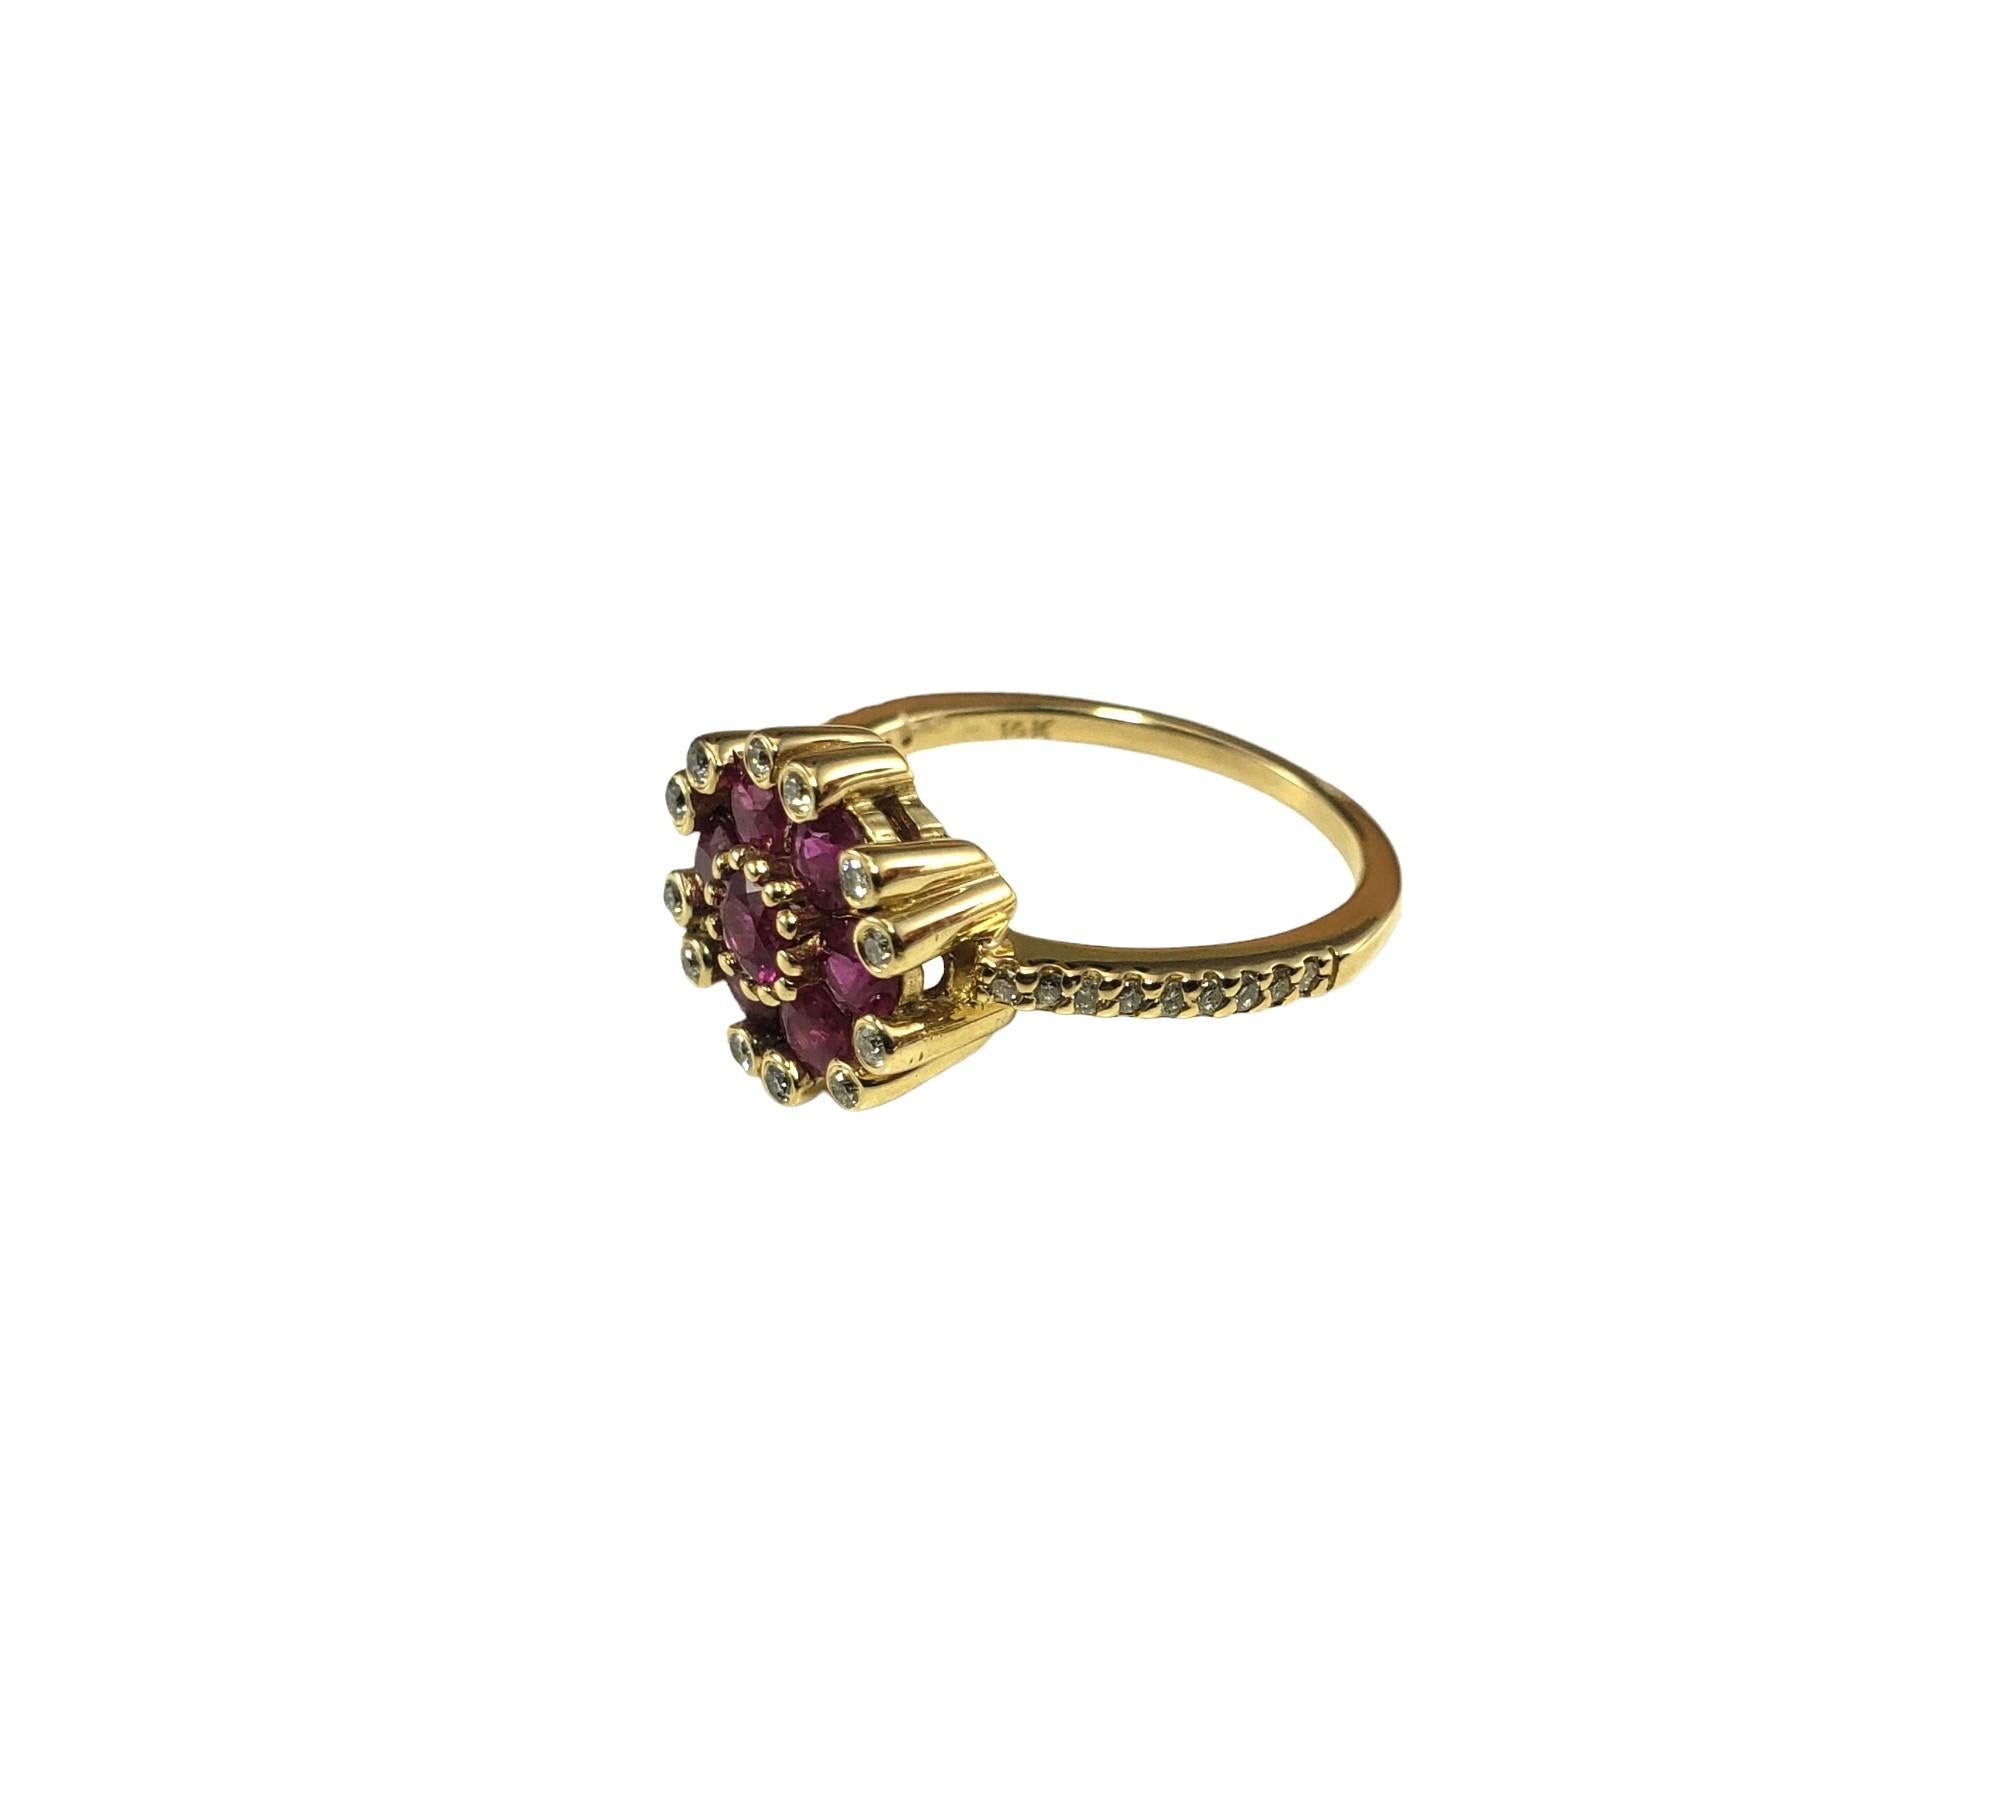 Effy 14K Yellow Gold Ruby and Diamond Ring Size 6.2 Certified-

This stunning ring features seven round natural rubies and 30 round brilliant cut diamonds set in classic 14K yellow gold. Width: 11 mm.  Shank: 1 mm.

Total ruby weight: 1.54

Total